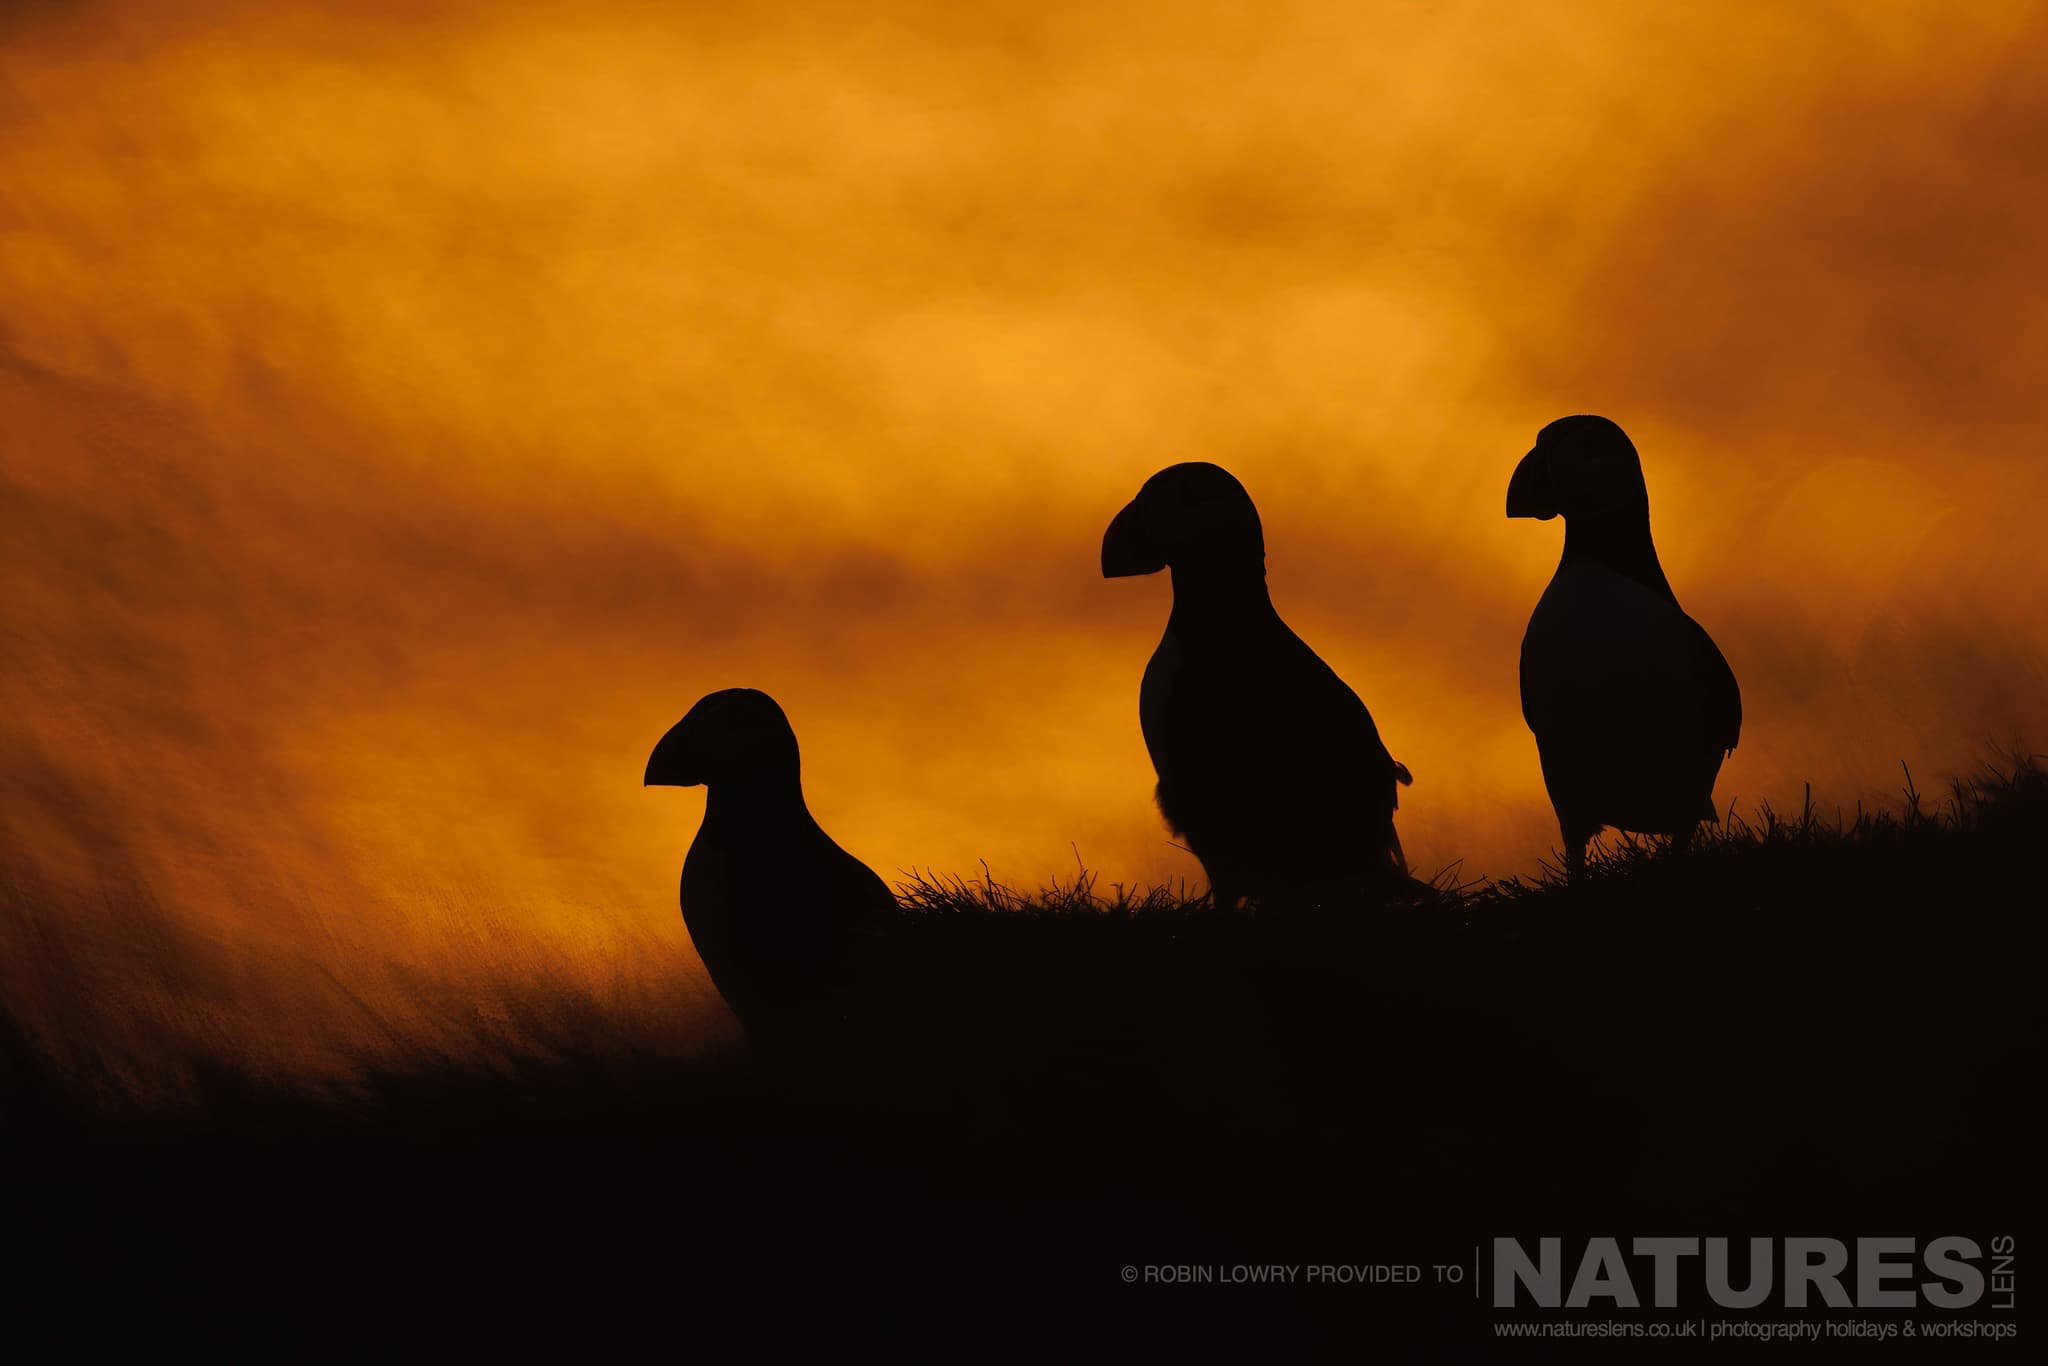 A Trio Of Silhouetted Atlantic Puffins, Photographed In Their Natural Habitat On Grímsey Island, Iceland